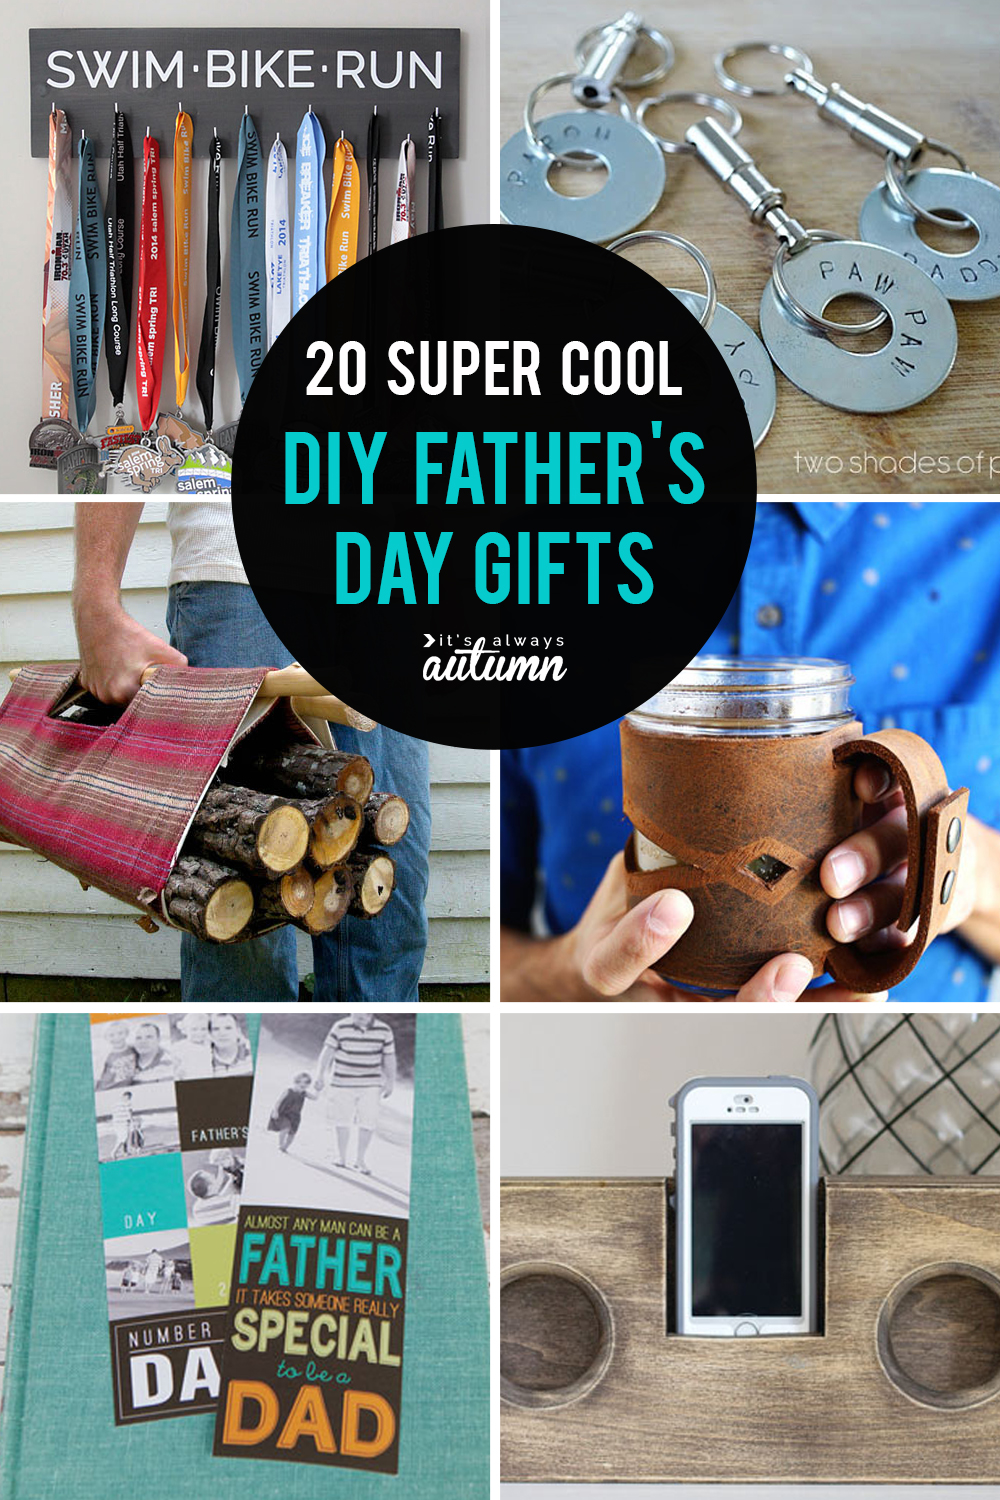 20 super cool DIY Father's Day gifts! Homemade gifts for Dad. Click through for all the tutorials.